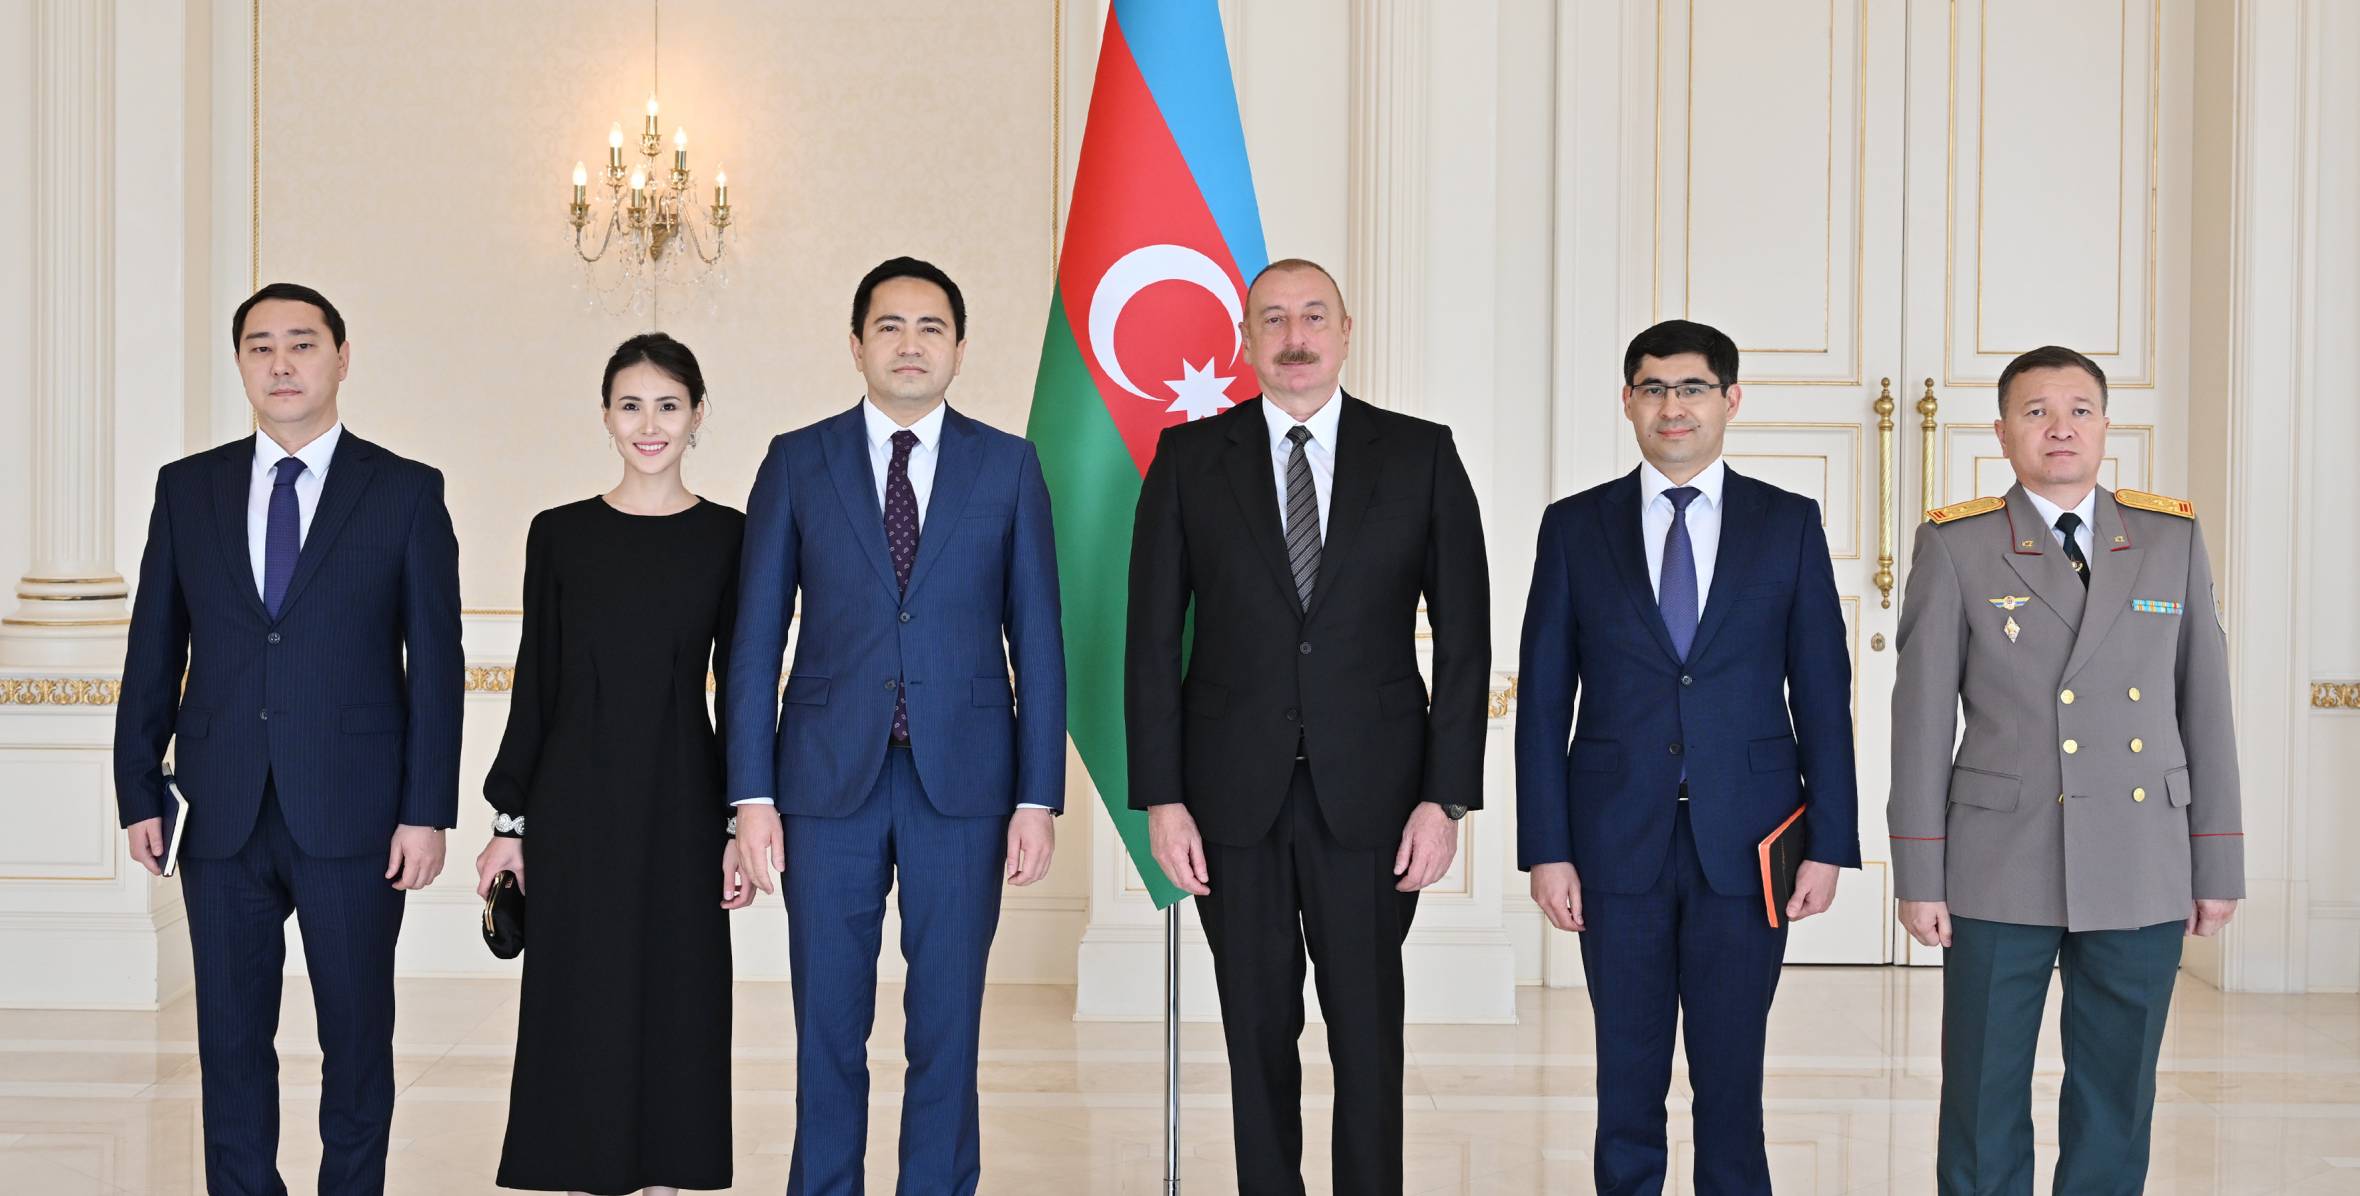 Ilham Aliyev accepted credentials of incoming ambassador of Kazakhstan